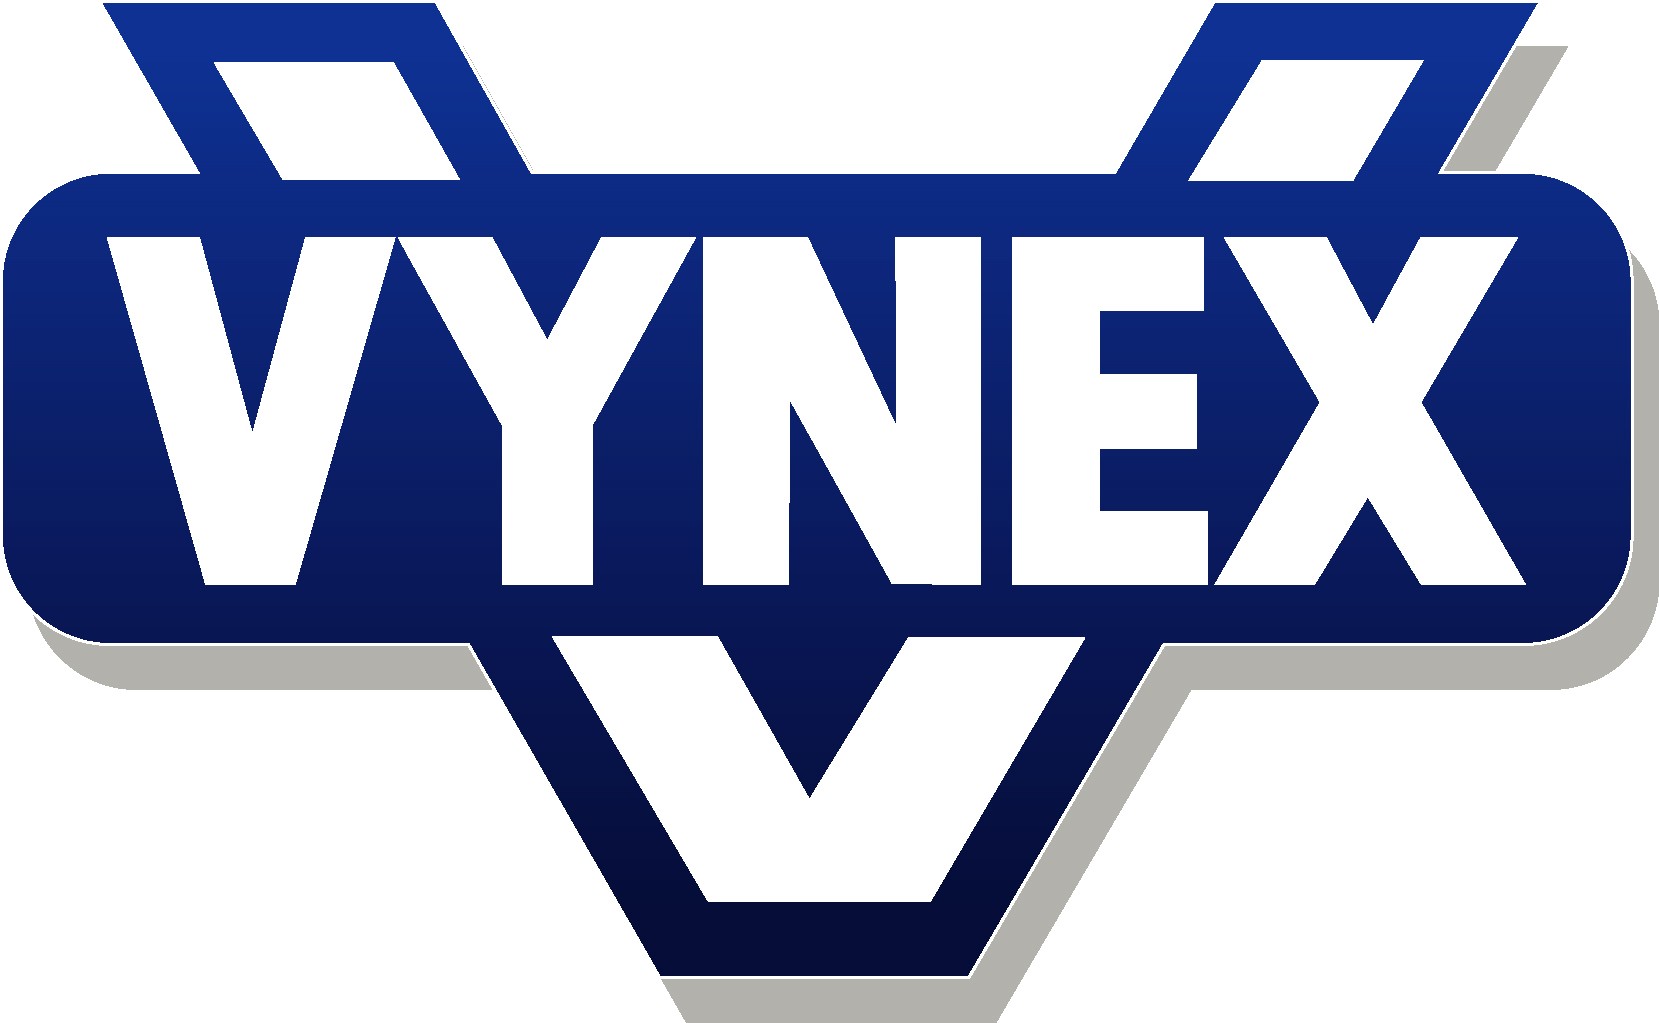 Vynex acsep logistique mapping production documentaire